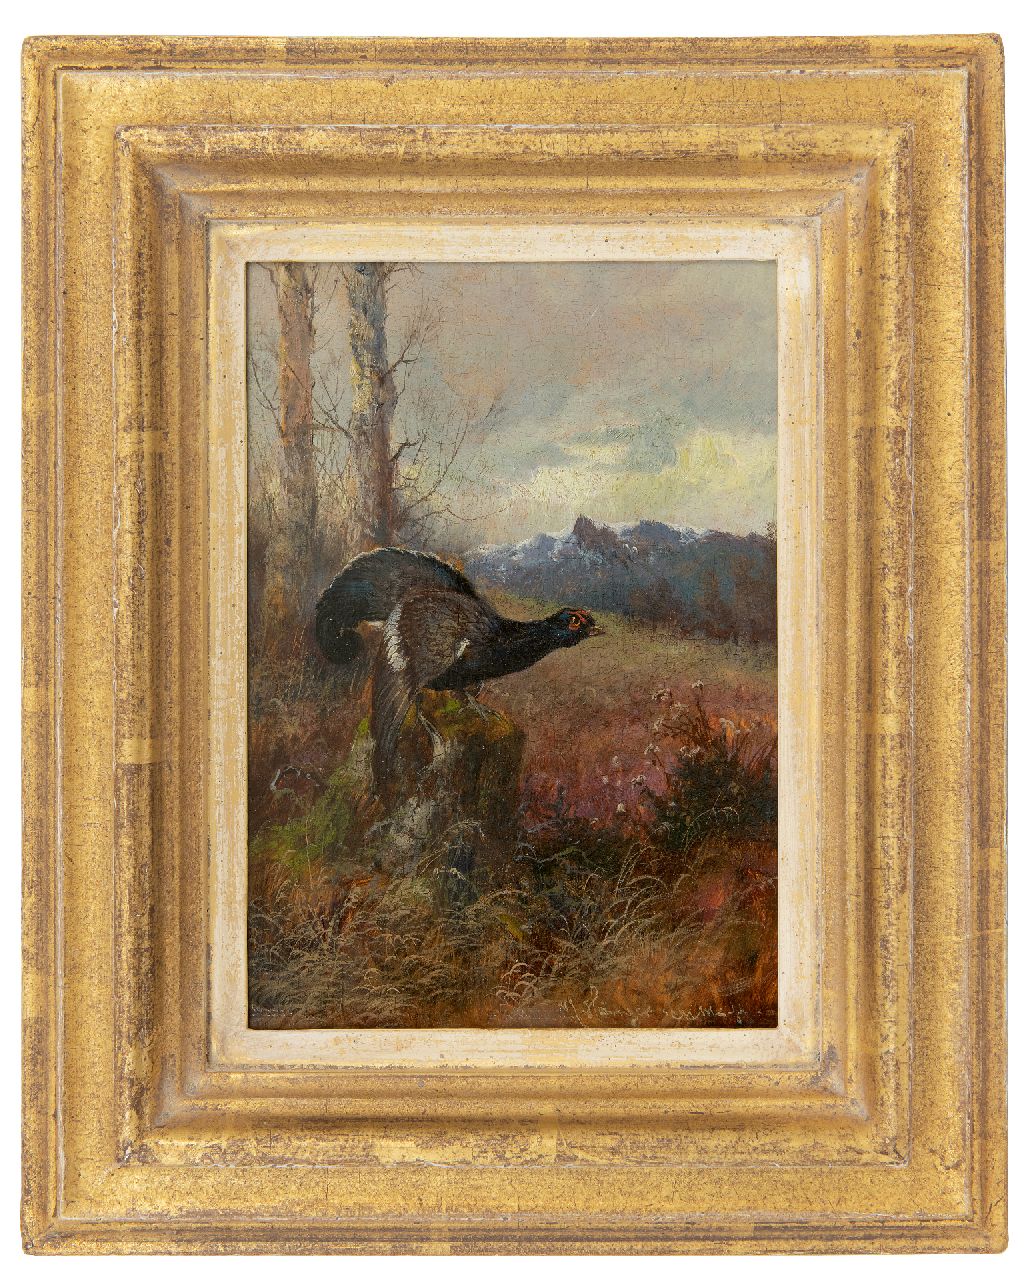 Hänger M.  | Max Hänger | Paintings offered for sale | Grouse looking right, oil on panel 19.7 x 13.8 cm, signed l.r.